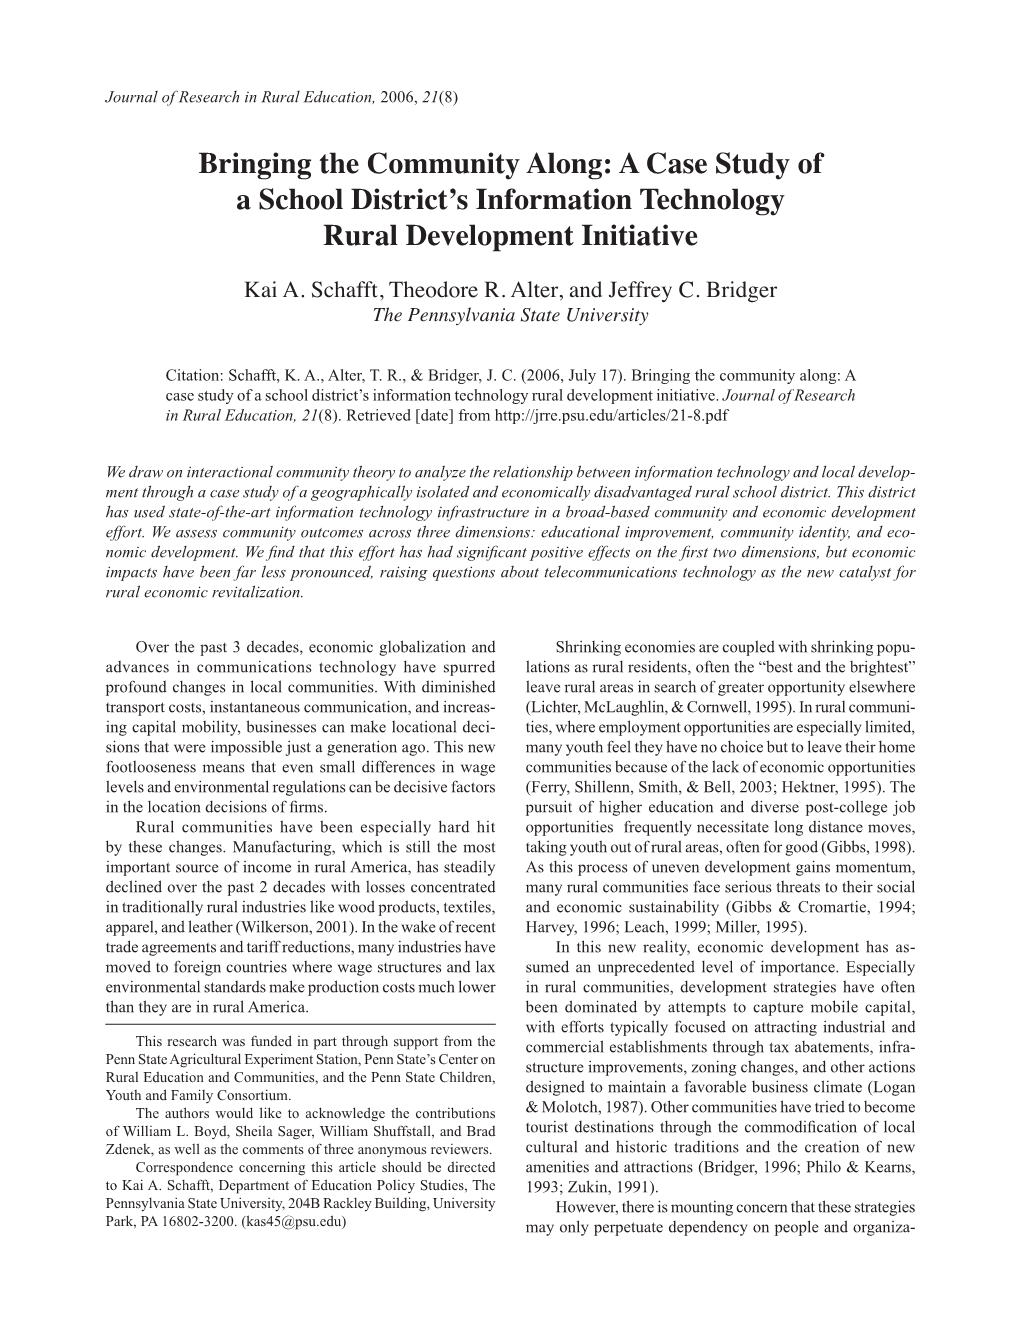 A Case Study of a School District's Information Technology Rural Development Initiative